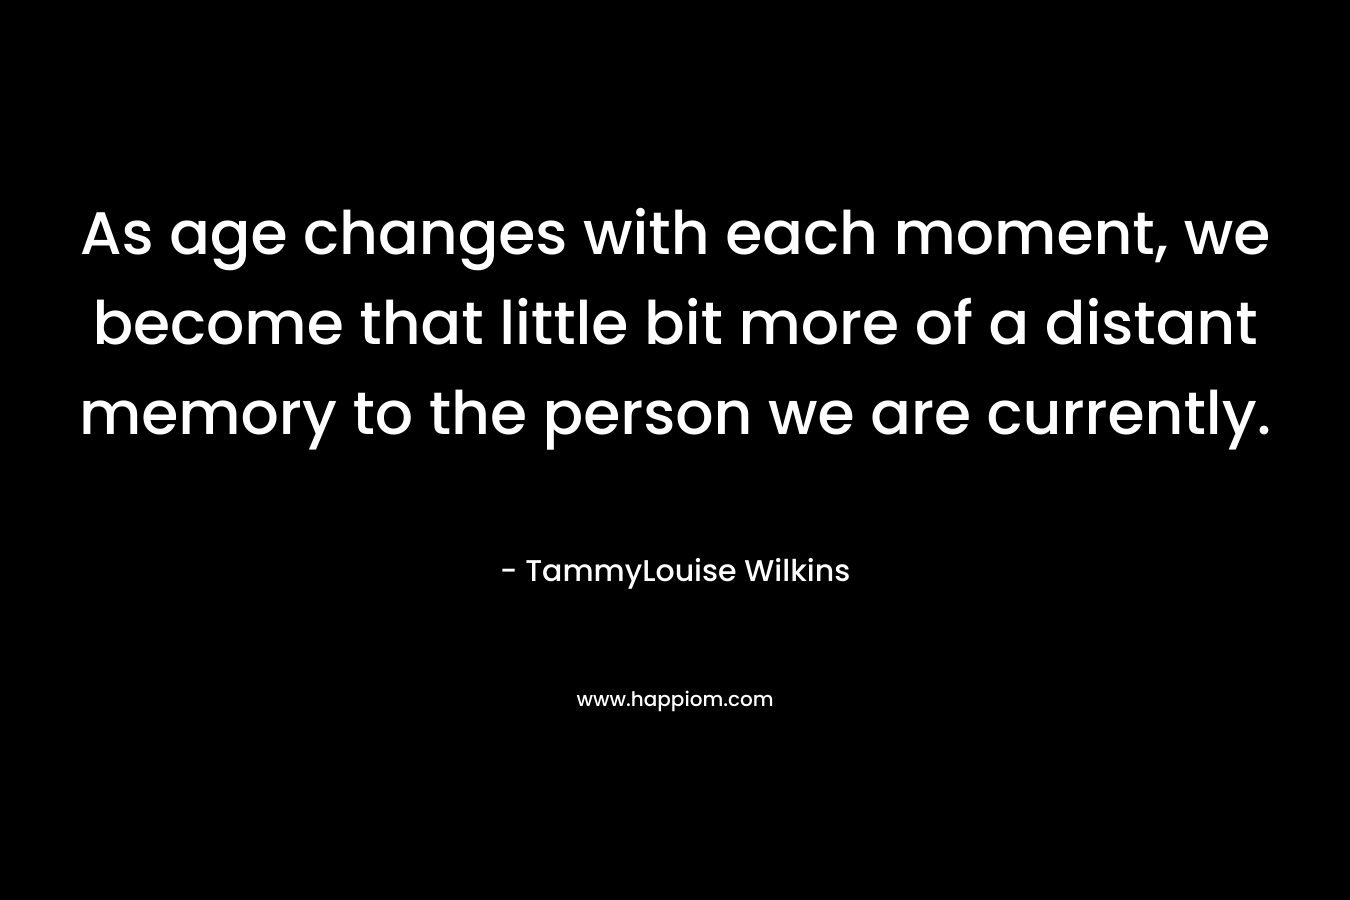 As age changes with each moment, we become that little bit more of a distant memory to the person we are currently. – TammyLouise Wilkins